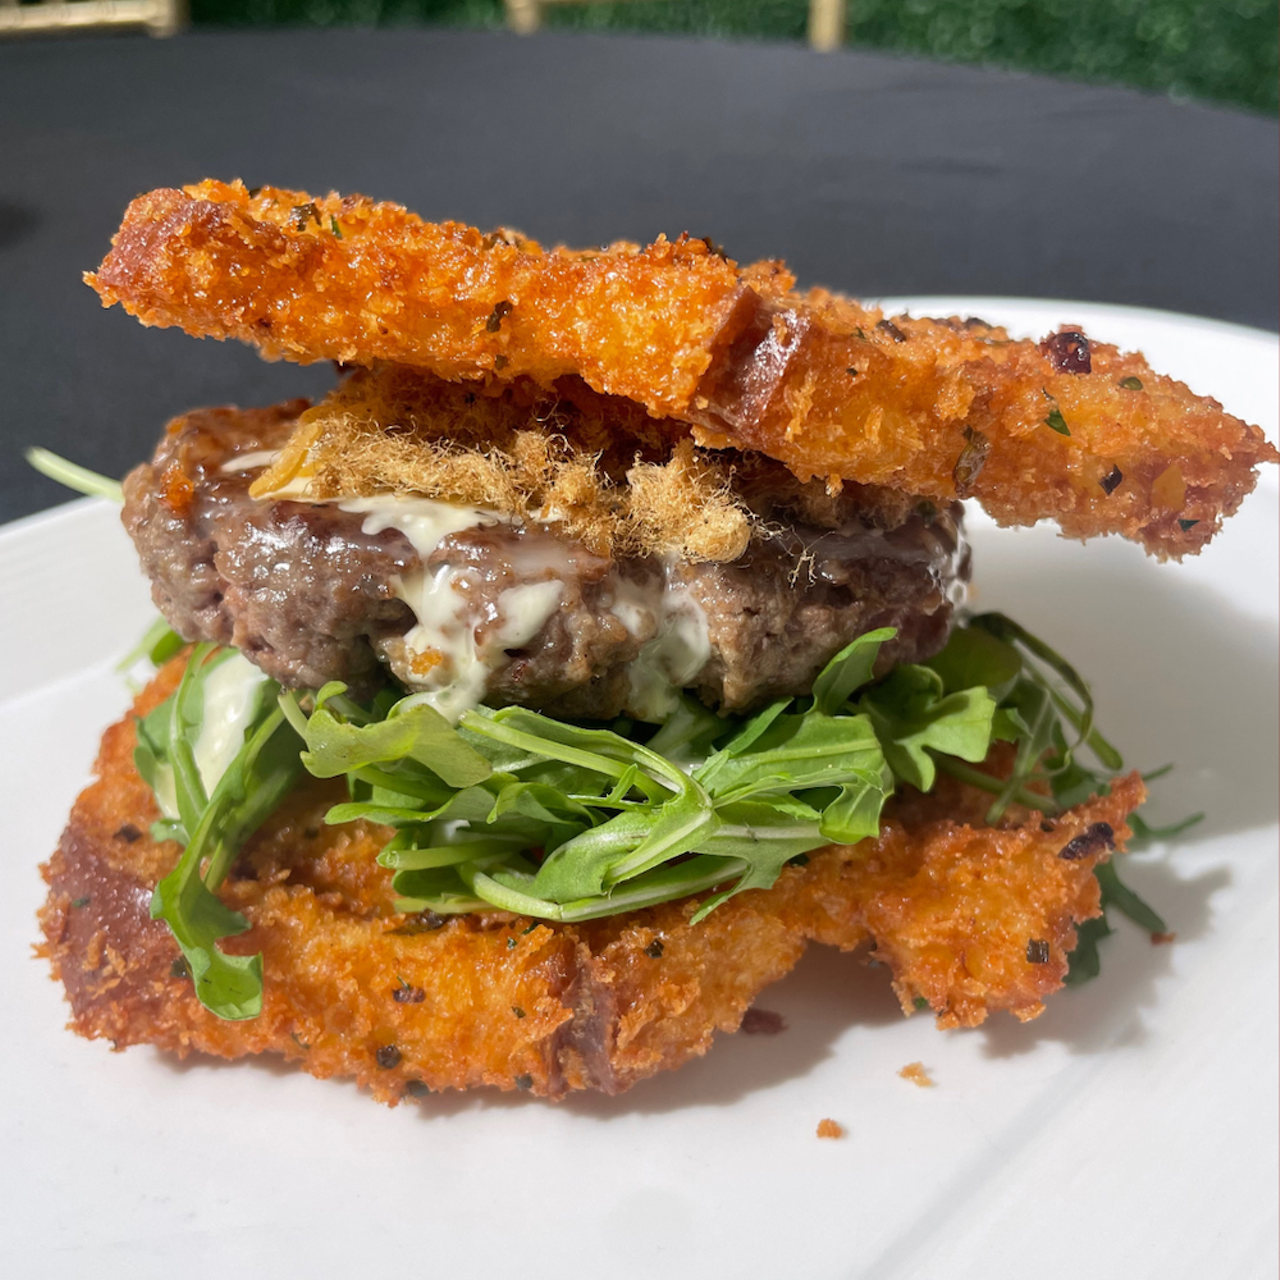 Birch & Vine
340 Beach Dr NE, St. Petersburg, FL 33701
tampabayburgerweek.com/birch-vine
Savory French Toast Burger - $10
6 oz. of umami spiced ground beef, pork jerky, fried brioche toast, sun dried tomatoes, goat cheese anglaise, and arugula
Stop by Birchwood Canopy rooftop bar after your burger for $5 Funky Buddha Floridian Drafts!
Dine-in